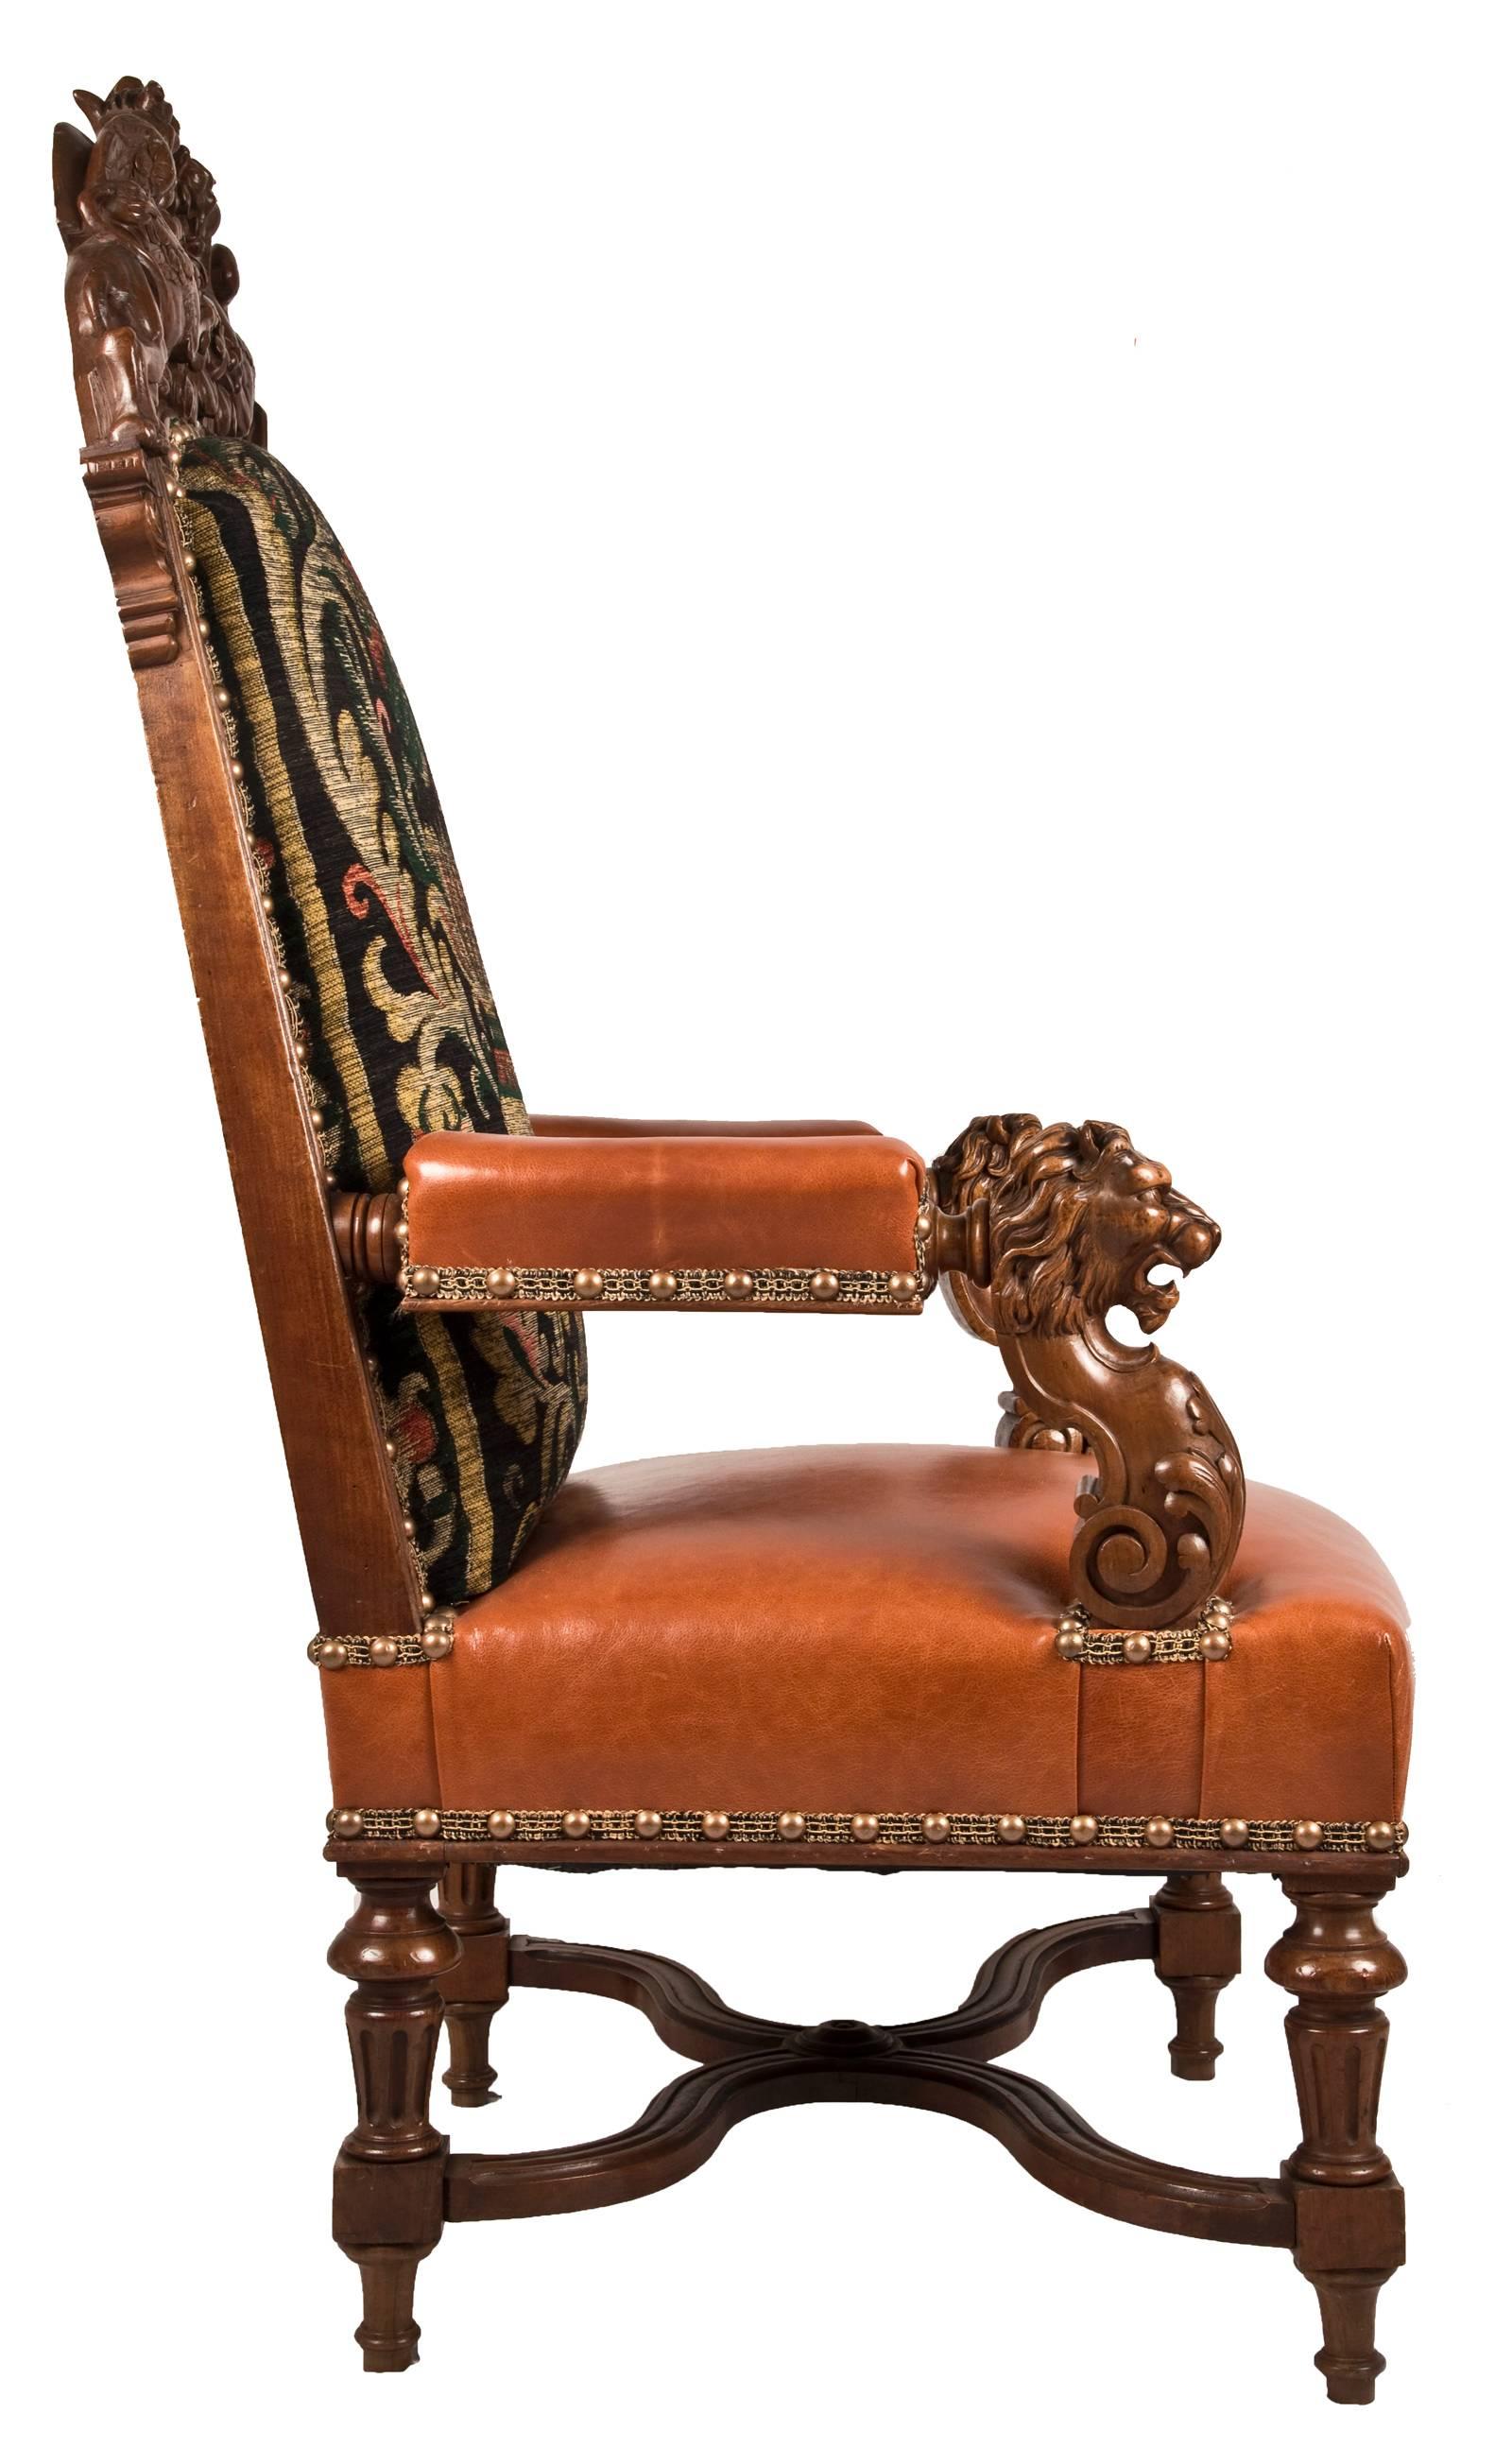 European Pair of 19th Century Louis XIV Style Fauteuil Walnut Chairs